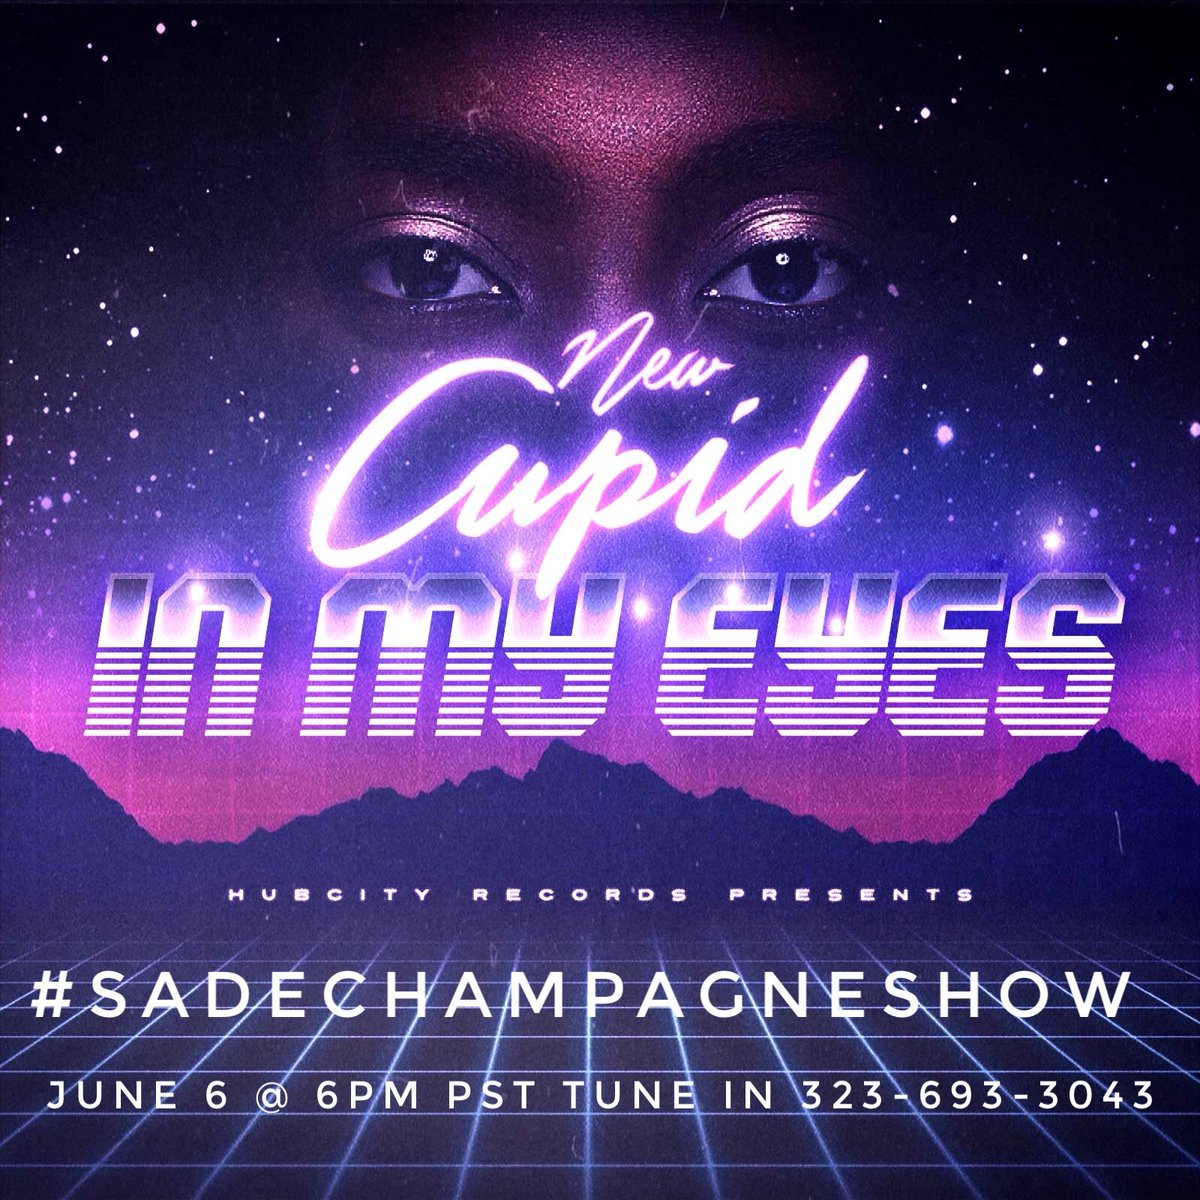 Tune in LIVE to New Cupid on the #sadechampagneshow THIS WEDNESDAY at 6pm PST by dialing 323-693-3043 or using this link:
blogtalkradio.com/grindhard_radi…
🤗🎉 @NEWCUPID @SadeChampagne #ElvieGPR #newcupid #music #radio #interview #tunein #inmyeyes